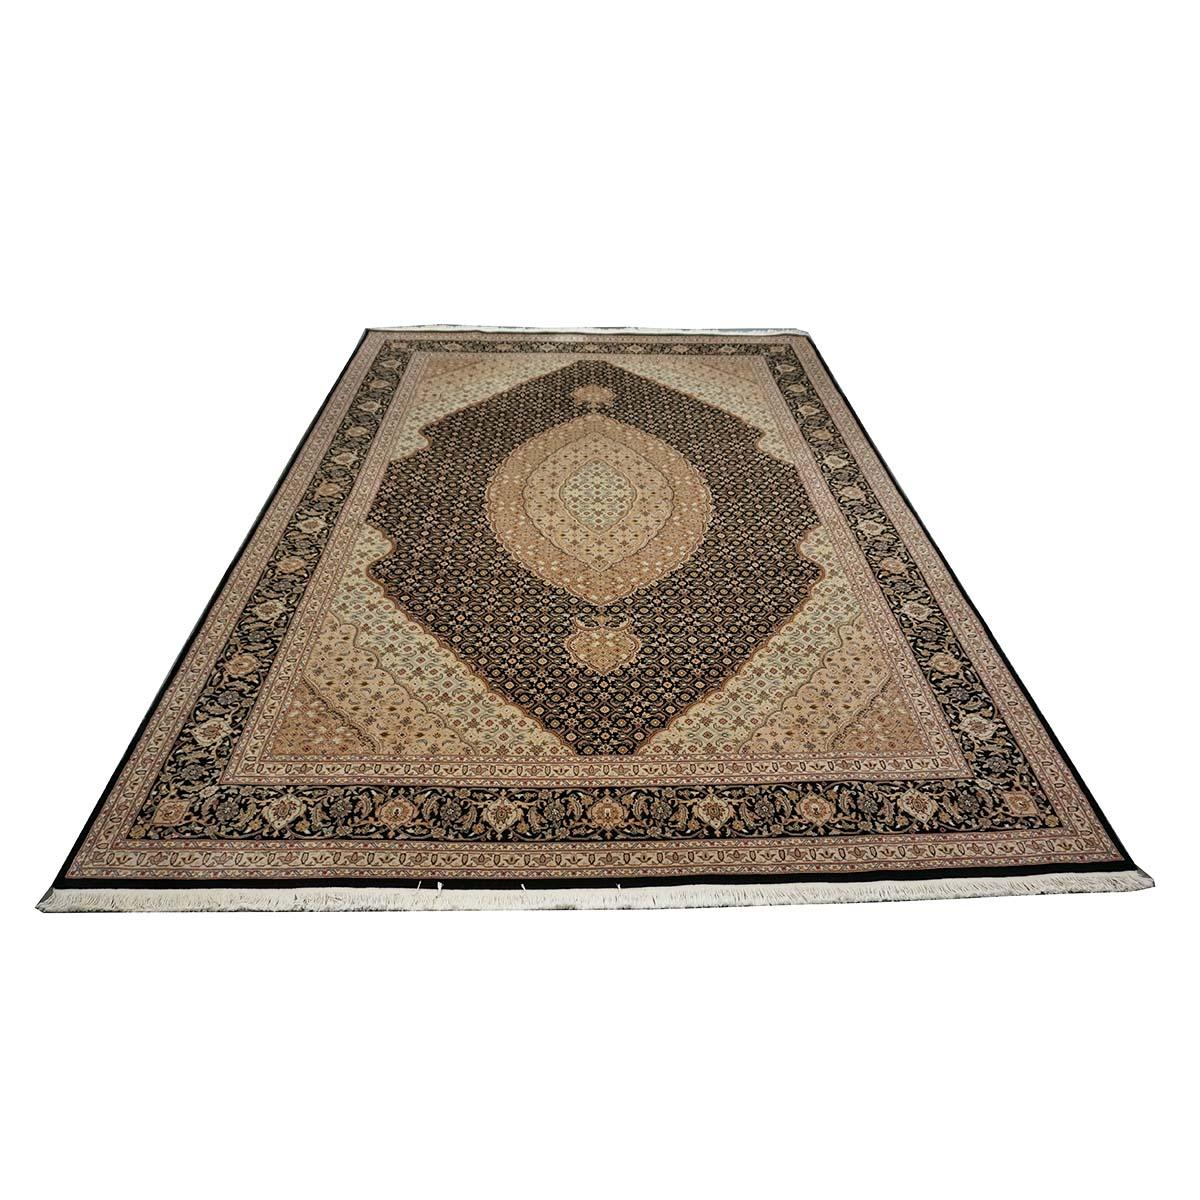 Vintage Sino-Persian Tabriz Mahi 9x12 Black, Ivory, & Taupe Handmade Area Rug In Good Condition For Sale In Houston, TX